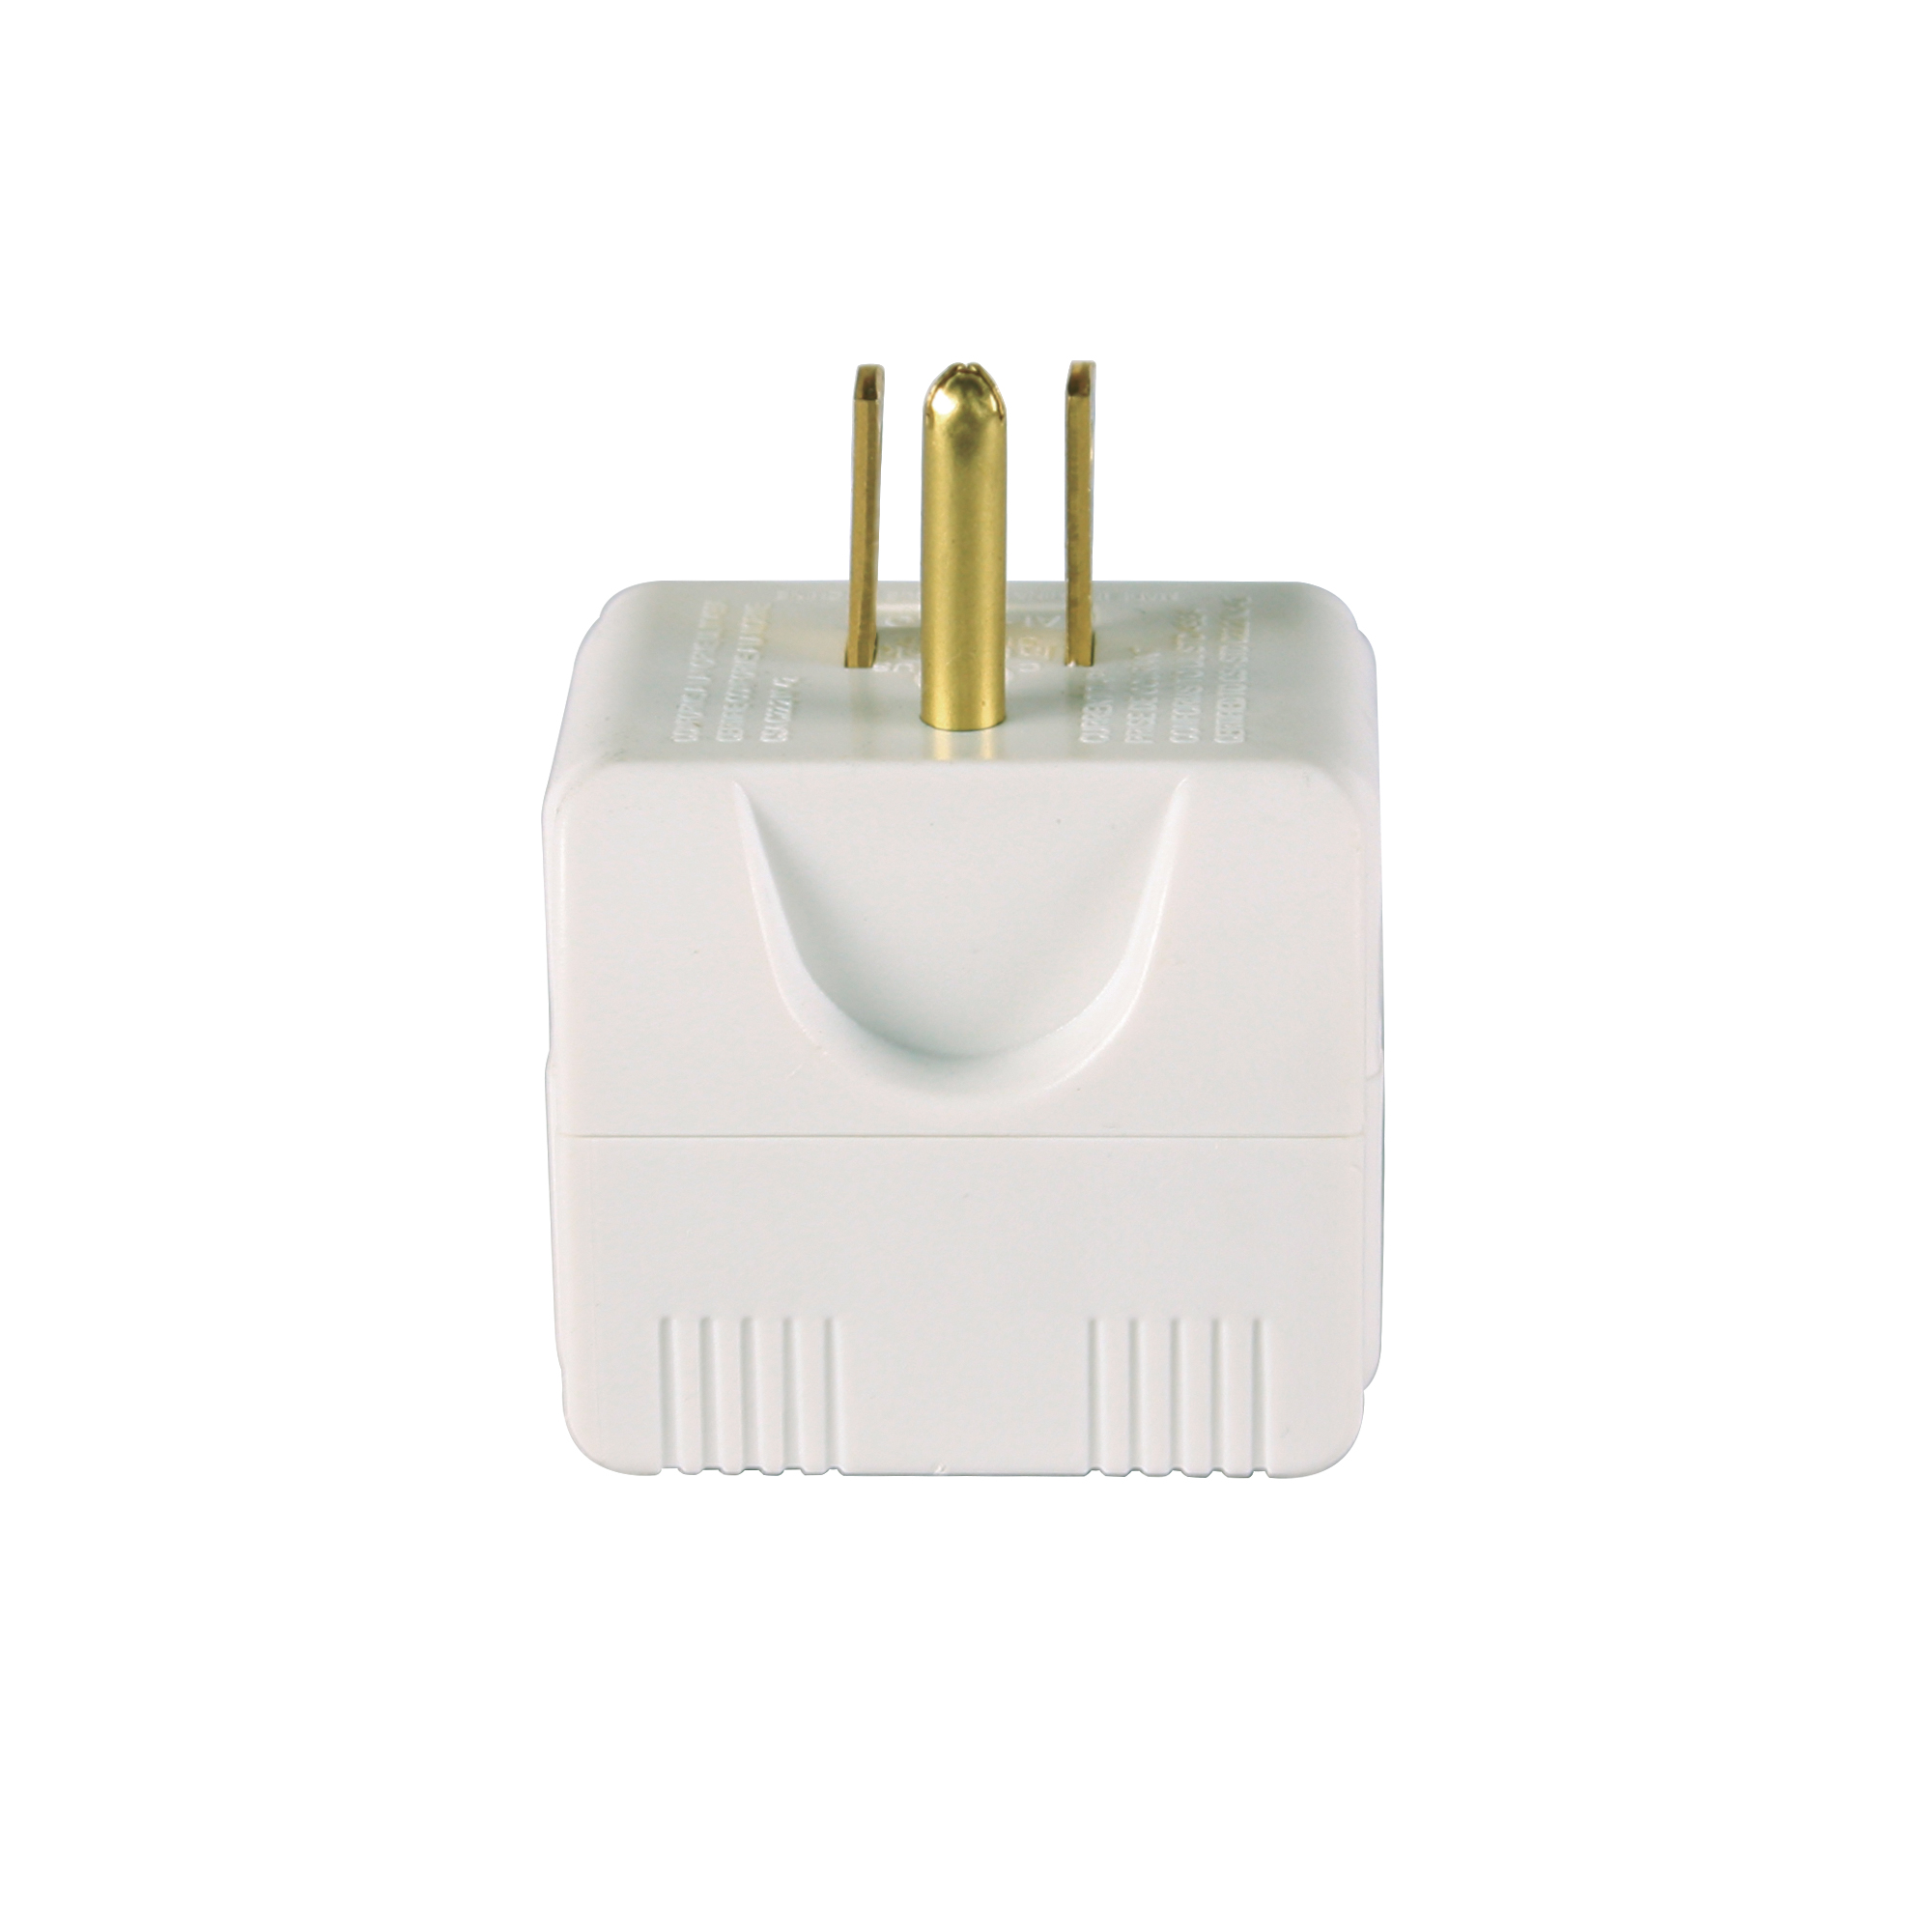 Hyper Tough 3-Outlet Grounded White Cube Adapter, 15 Amps - image 1 of 7